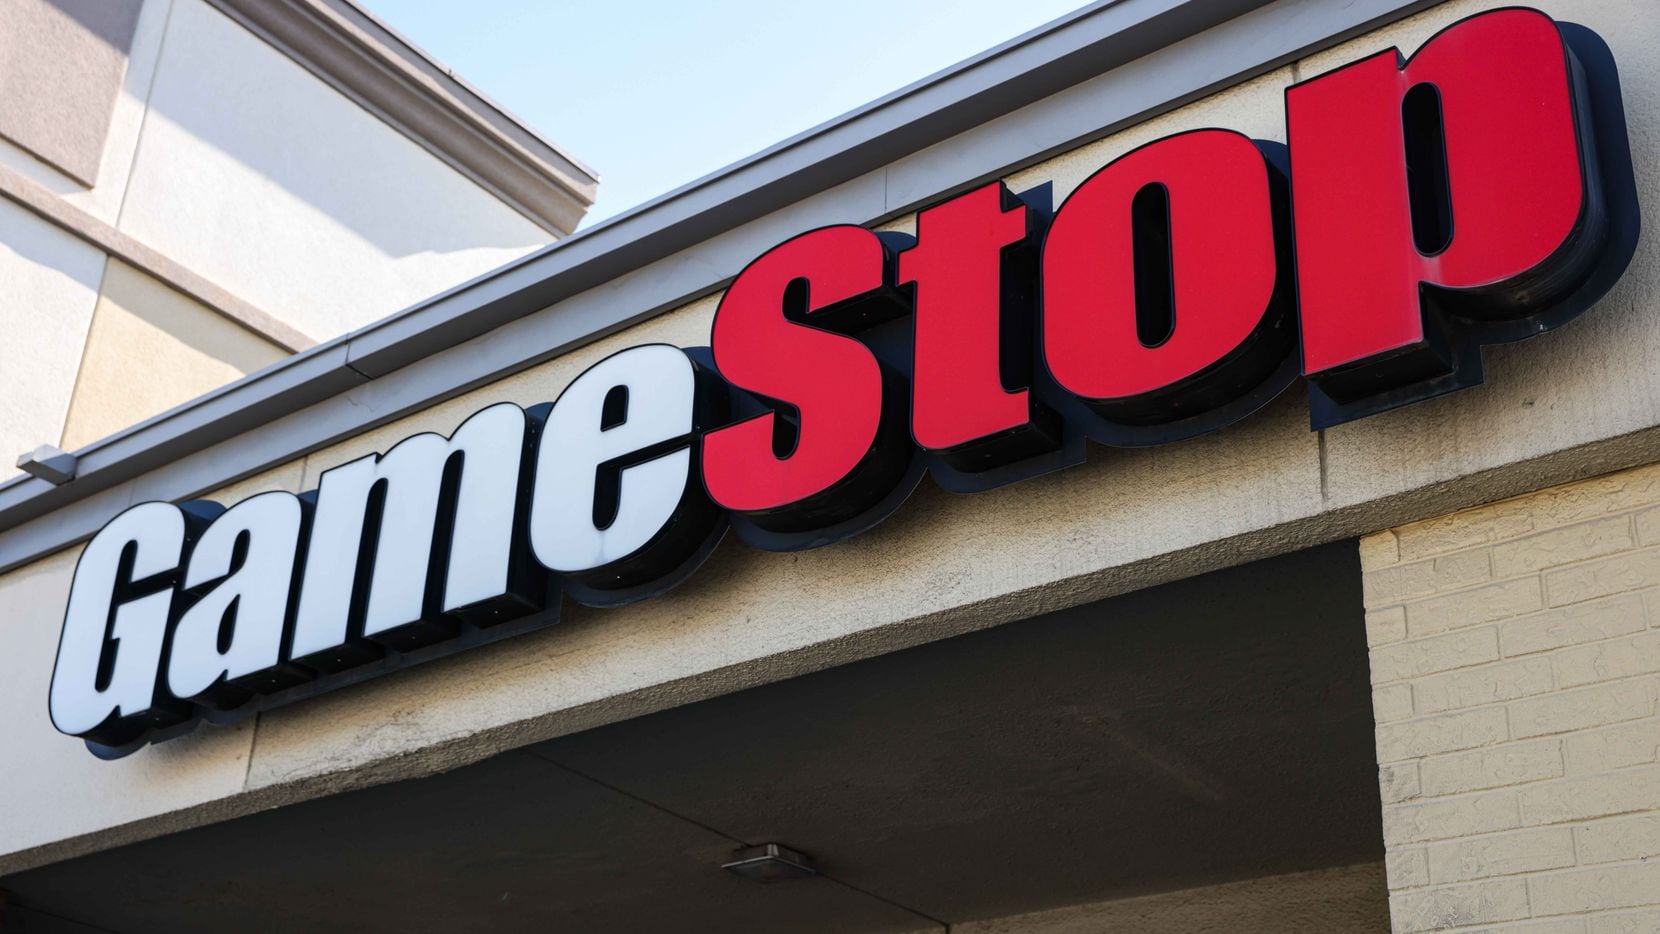 In January 2021, GameStop became a so-called meme stock after small investors swarmed to...